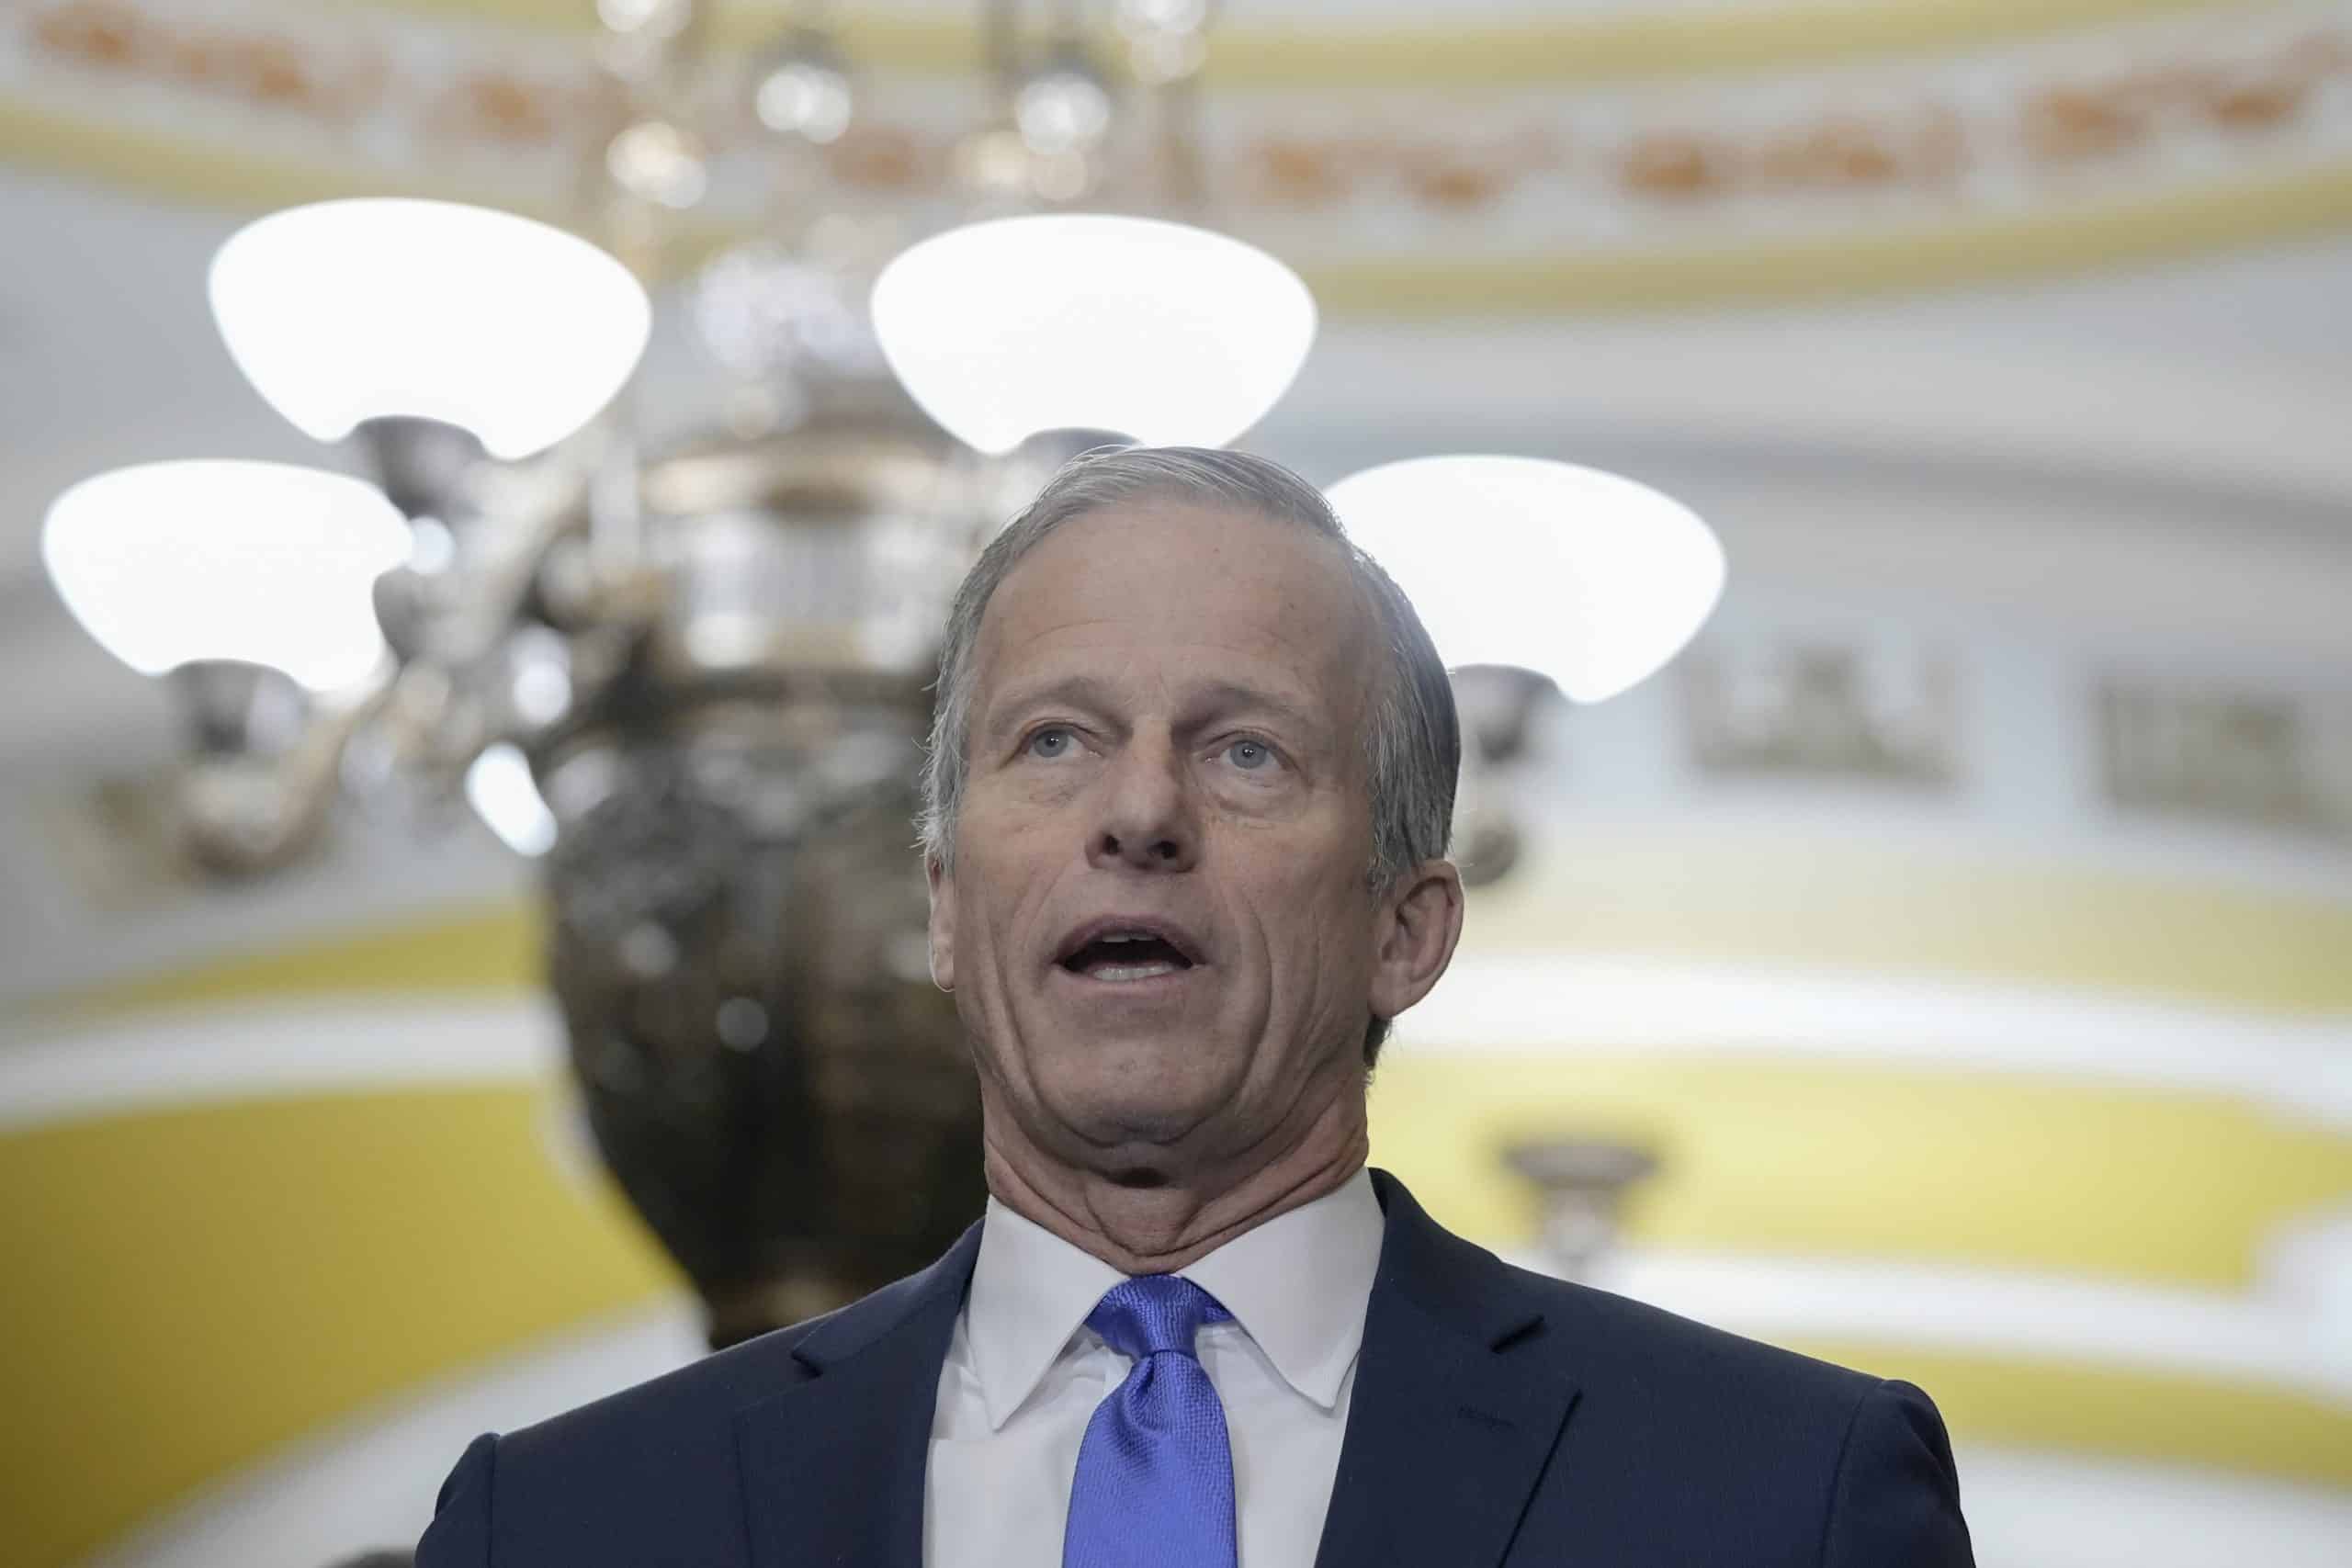 South Dakota Sen. John Thune jumps into race to succeed McConnell as